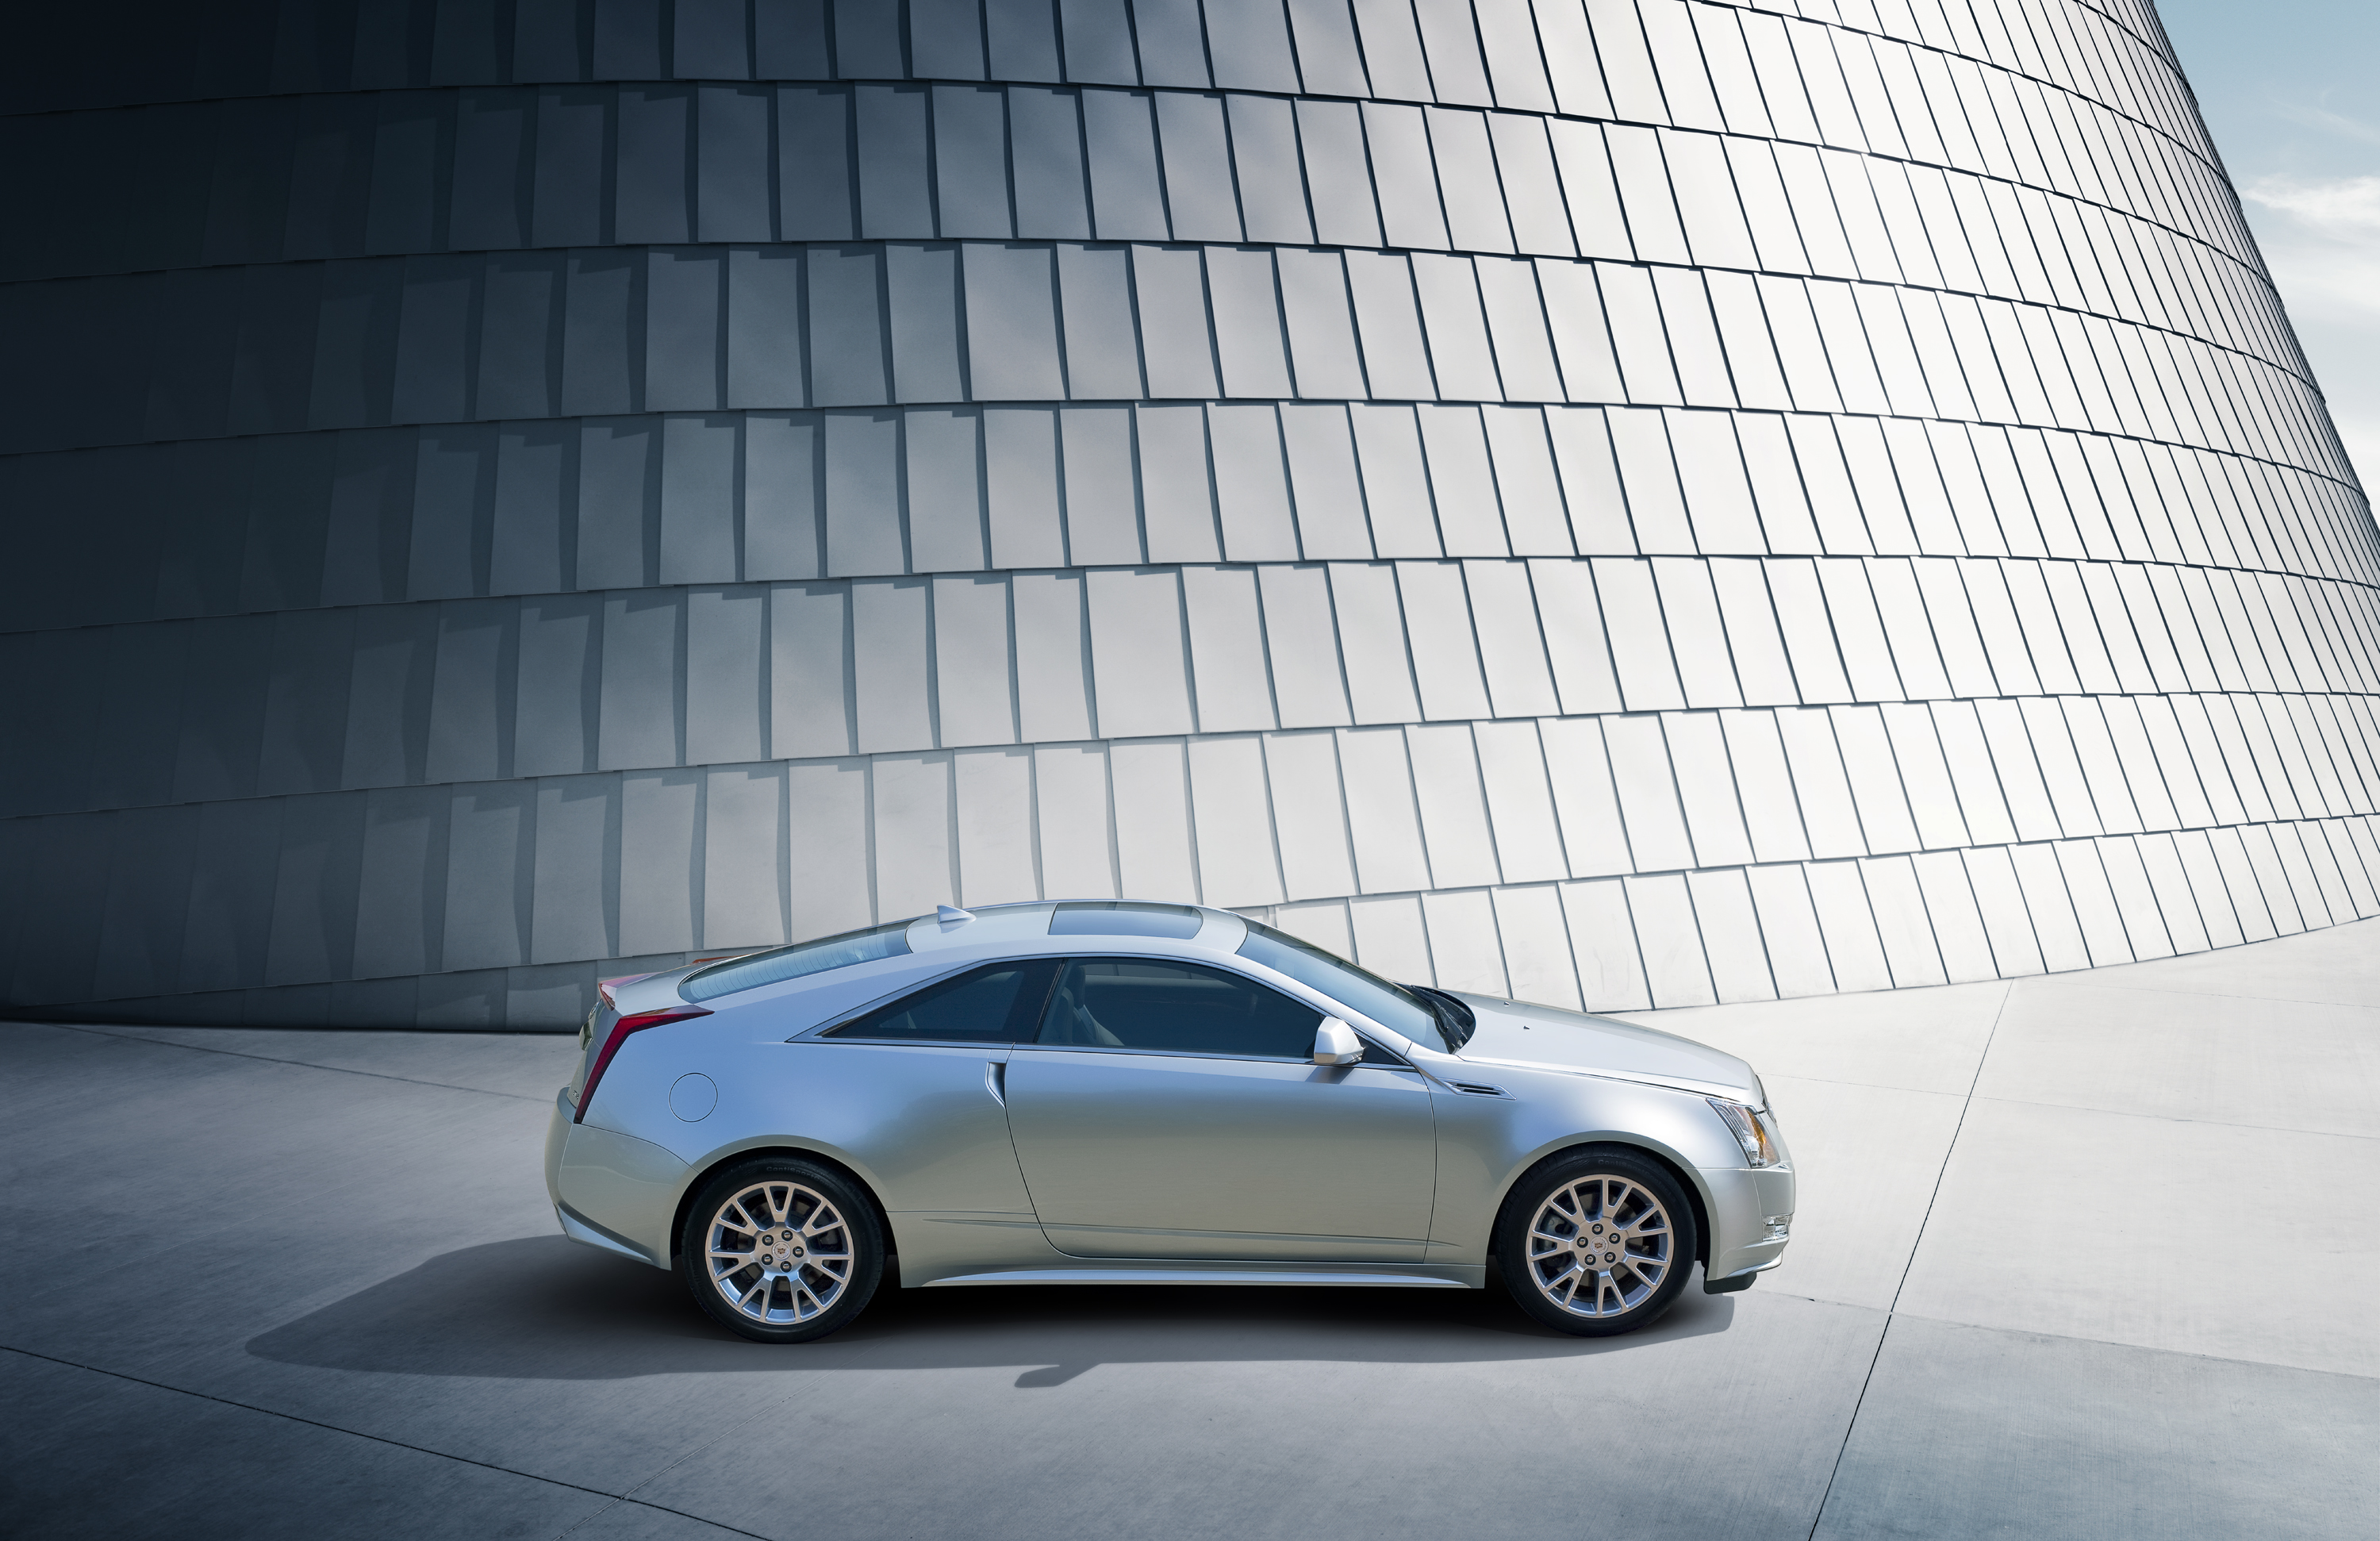 Cadillac today unveiled the 2011 CTS Coupe, the latest and most